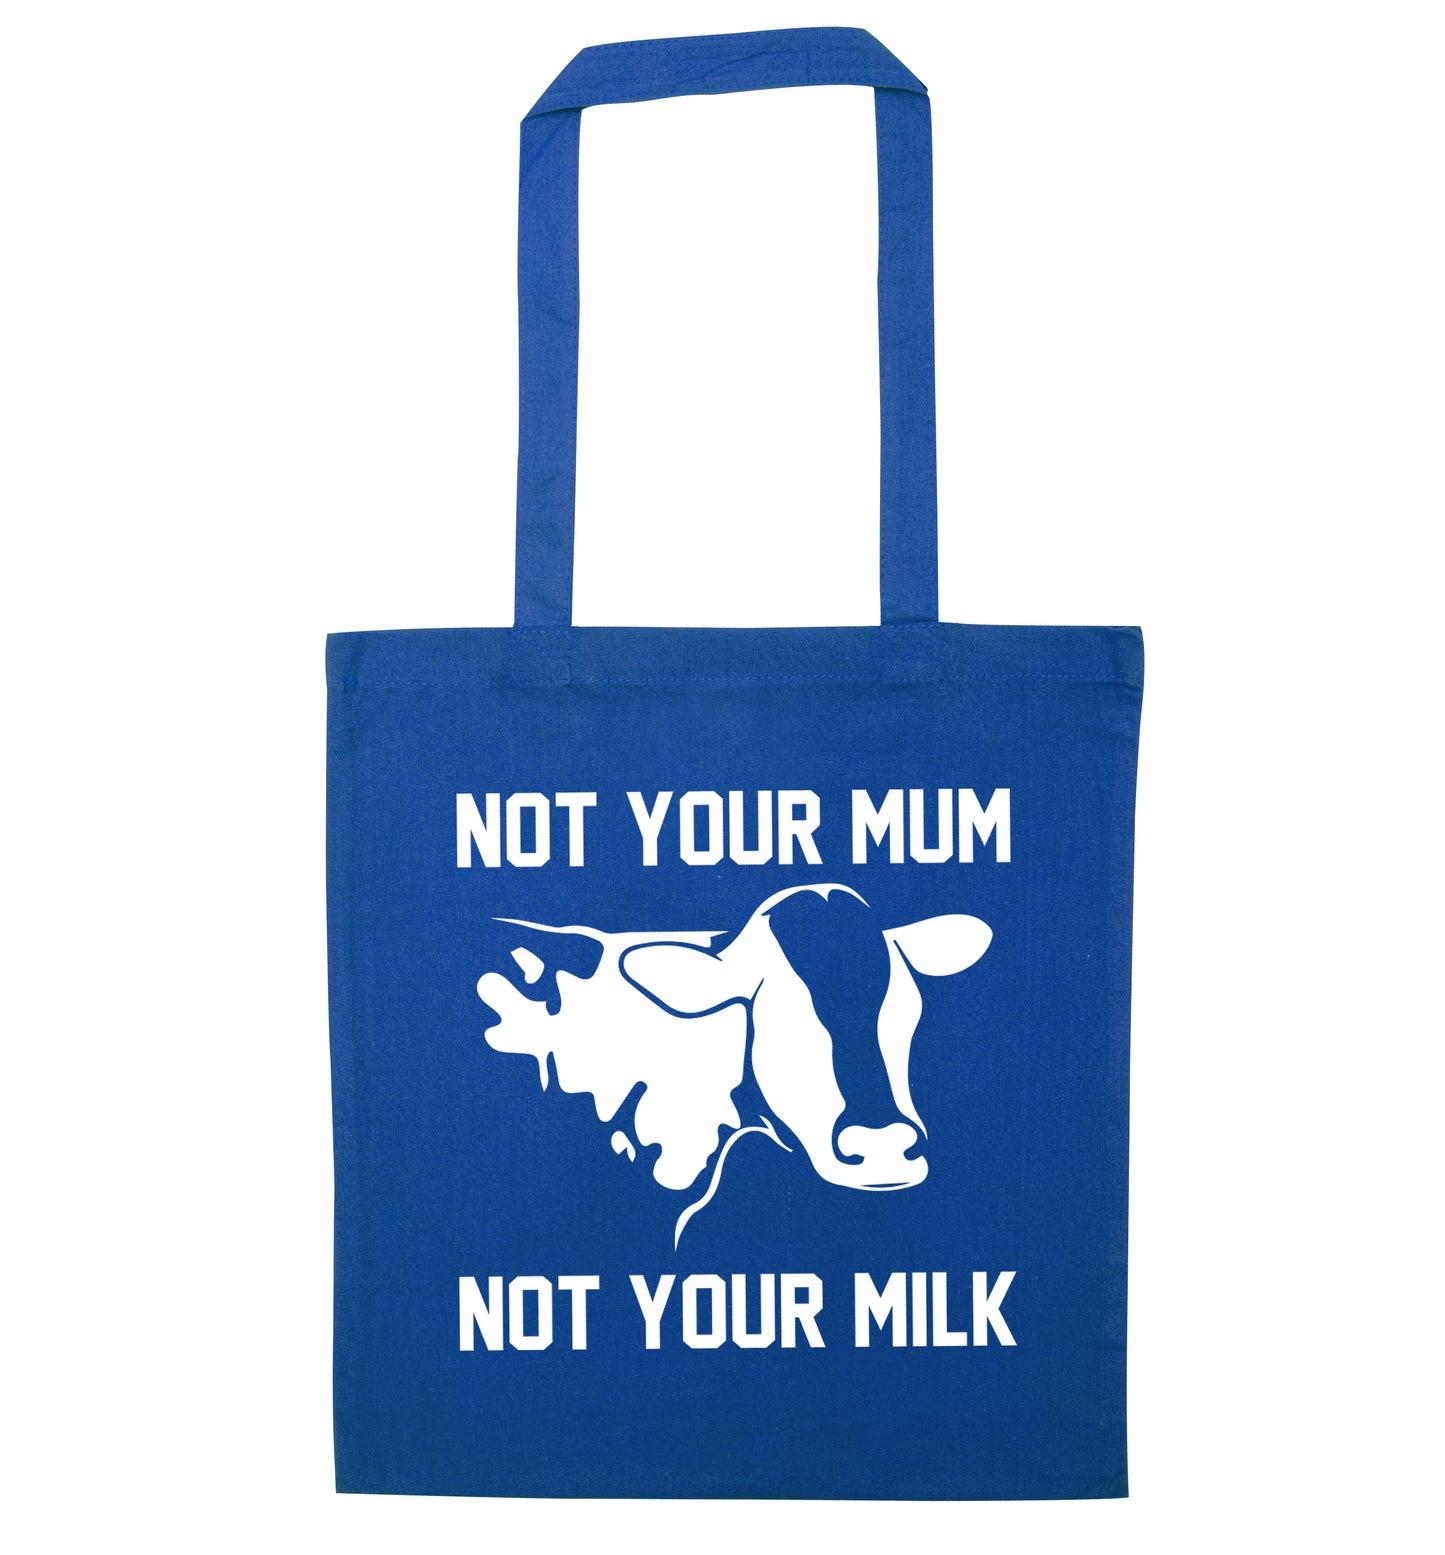 Not your mum not your milk blue tote bag